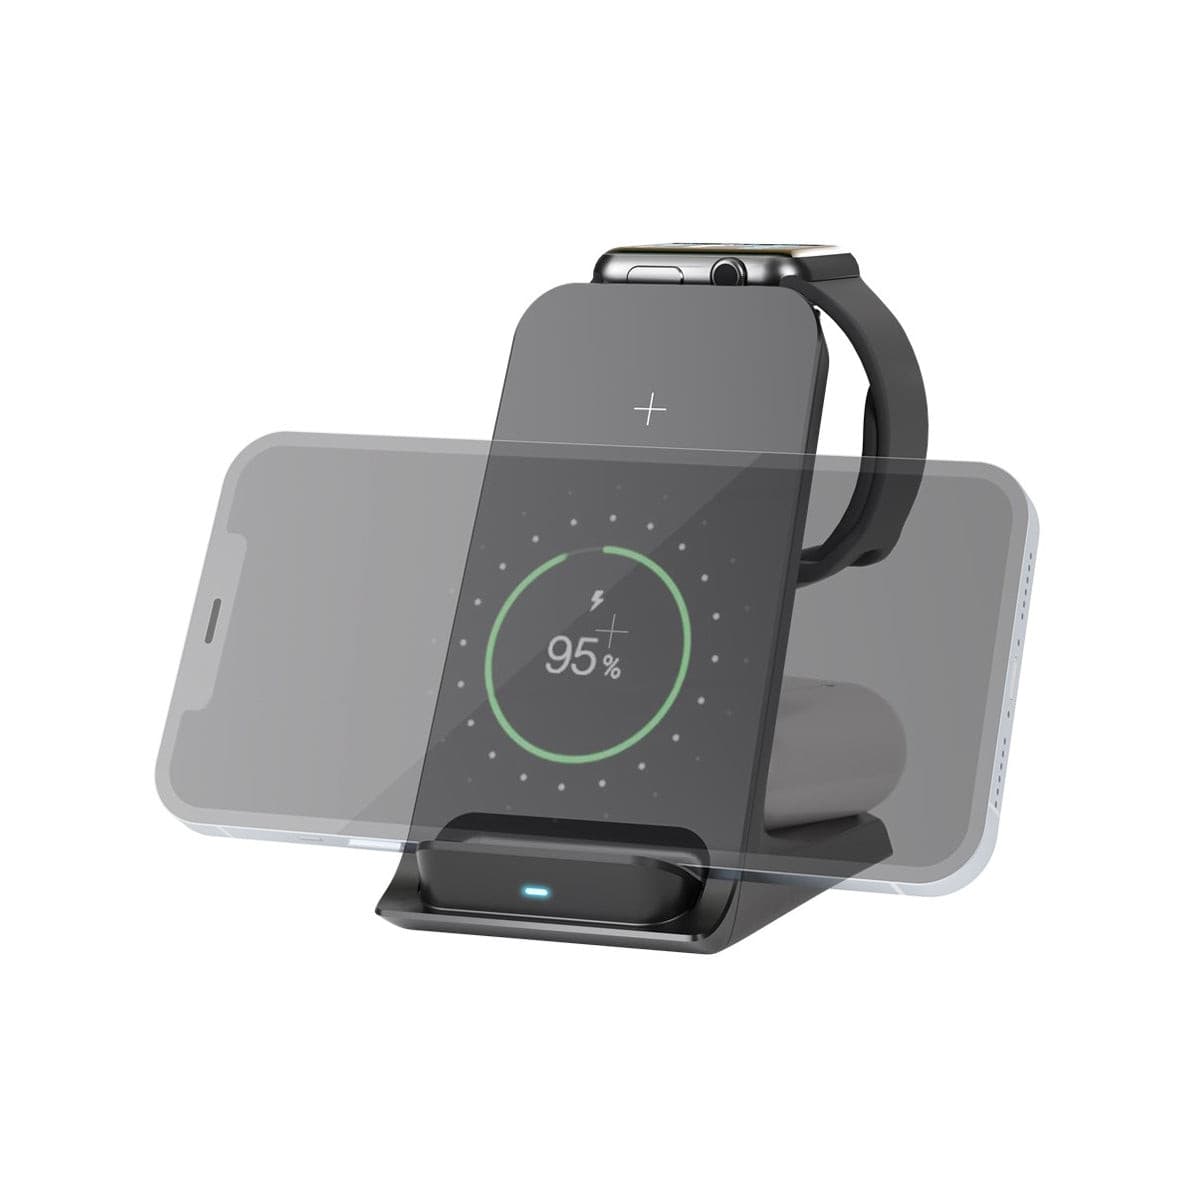 Goobay 3 in 1 Wireless Charger - Black.